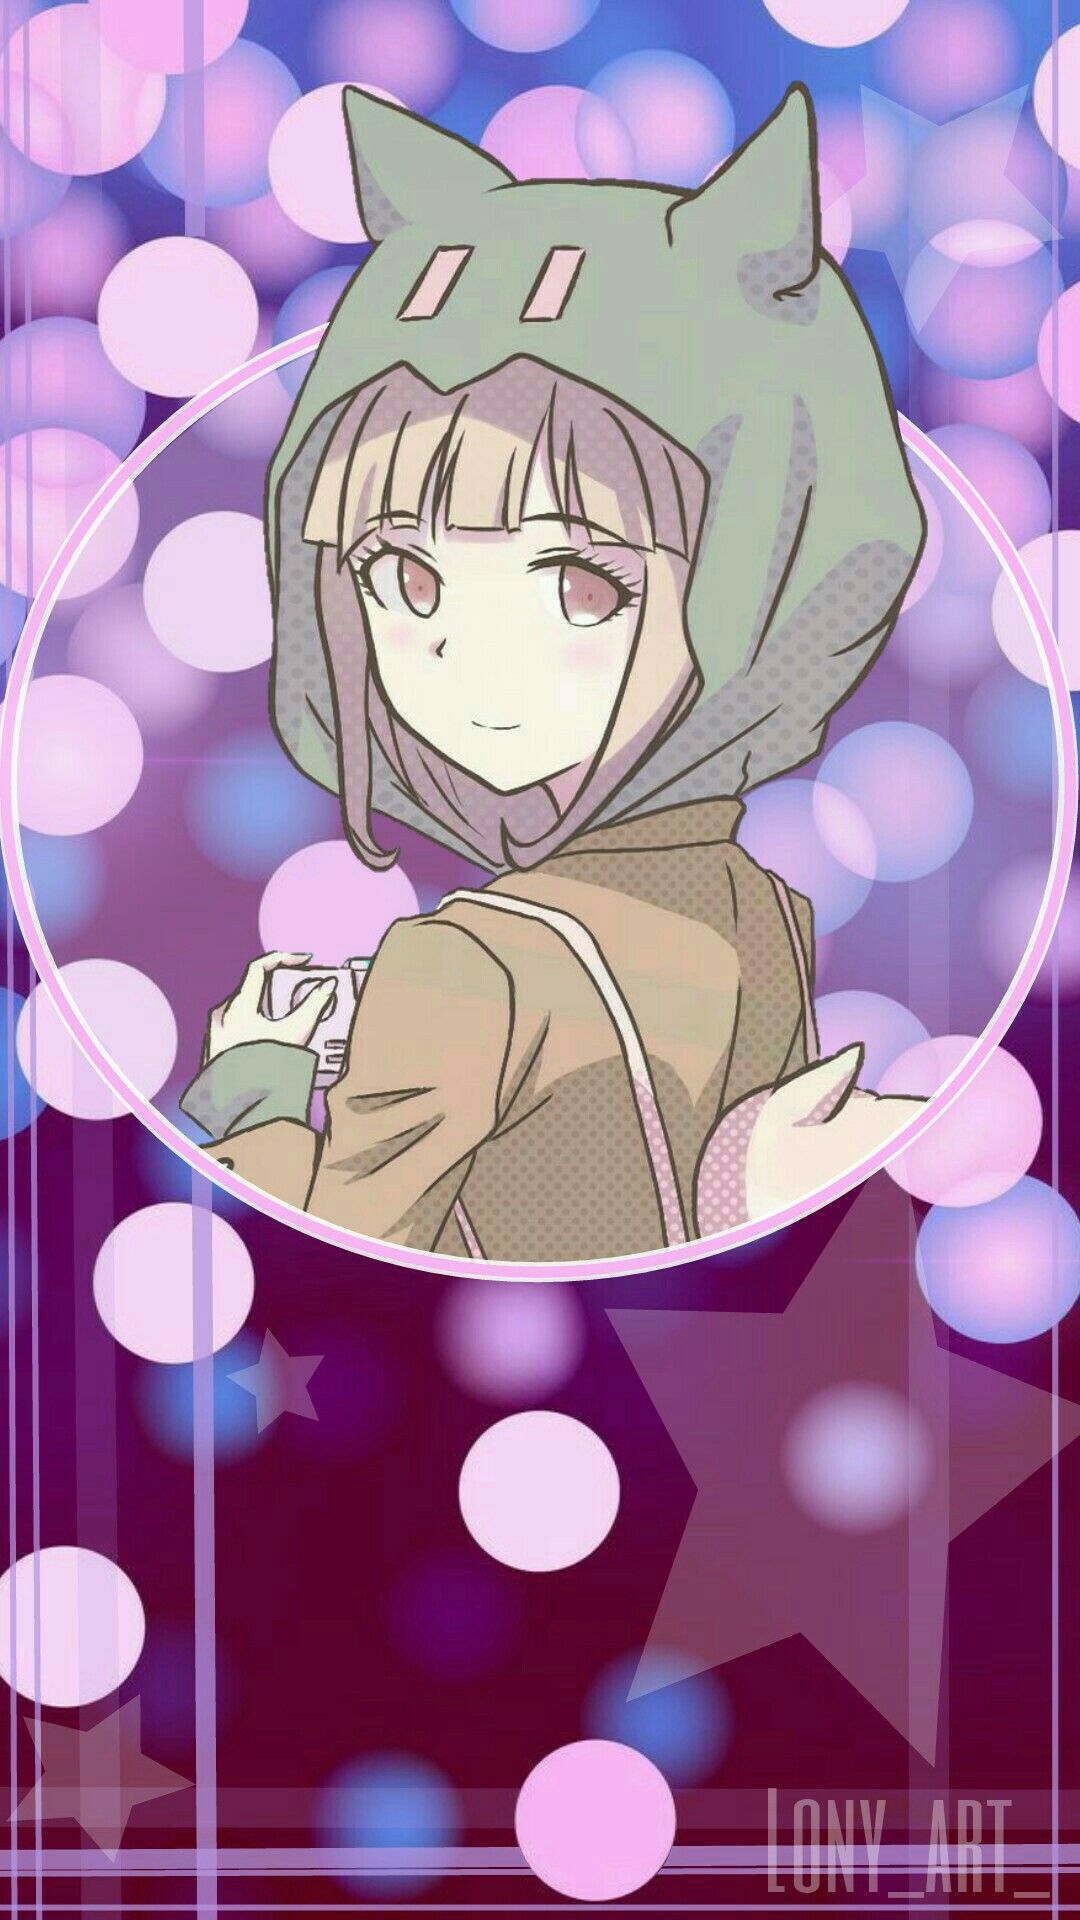 I made a wallpaper of Chiaki Nanami No image belongs to me all credits  belong to the original author if you are the author let me know I will  put your due